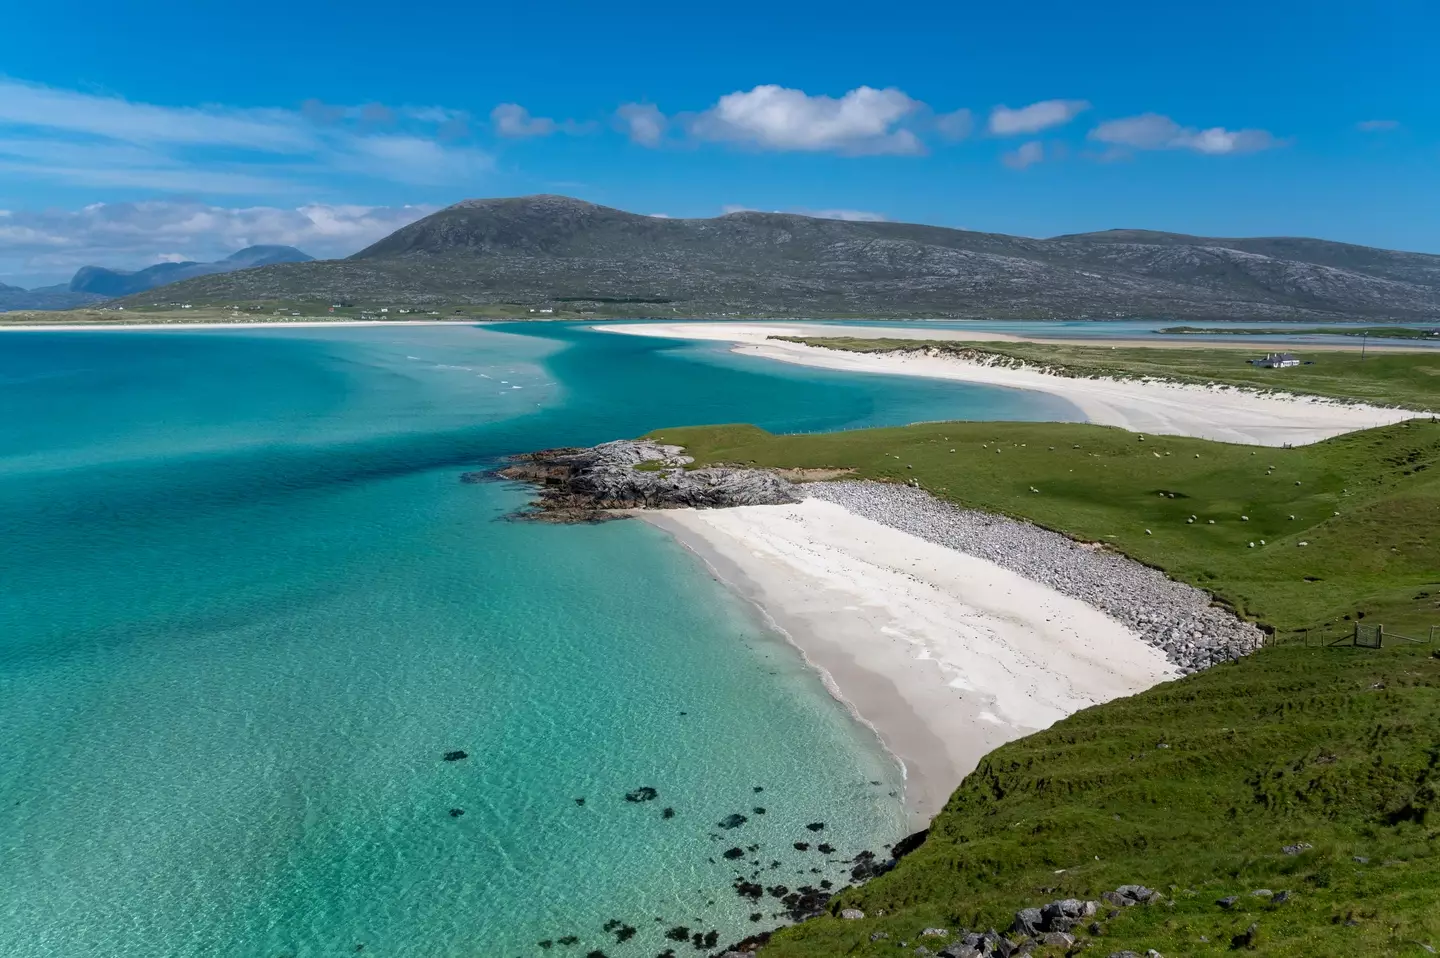 No, not the Bahamas, but Luskentyre Beach in the Outer Hebrides!